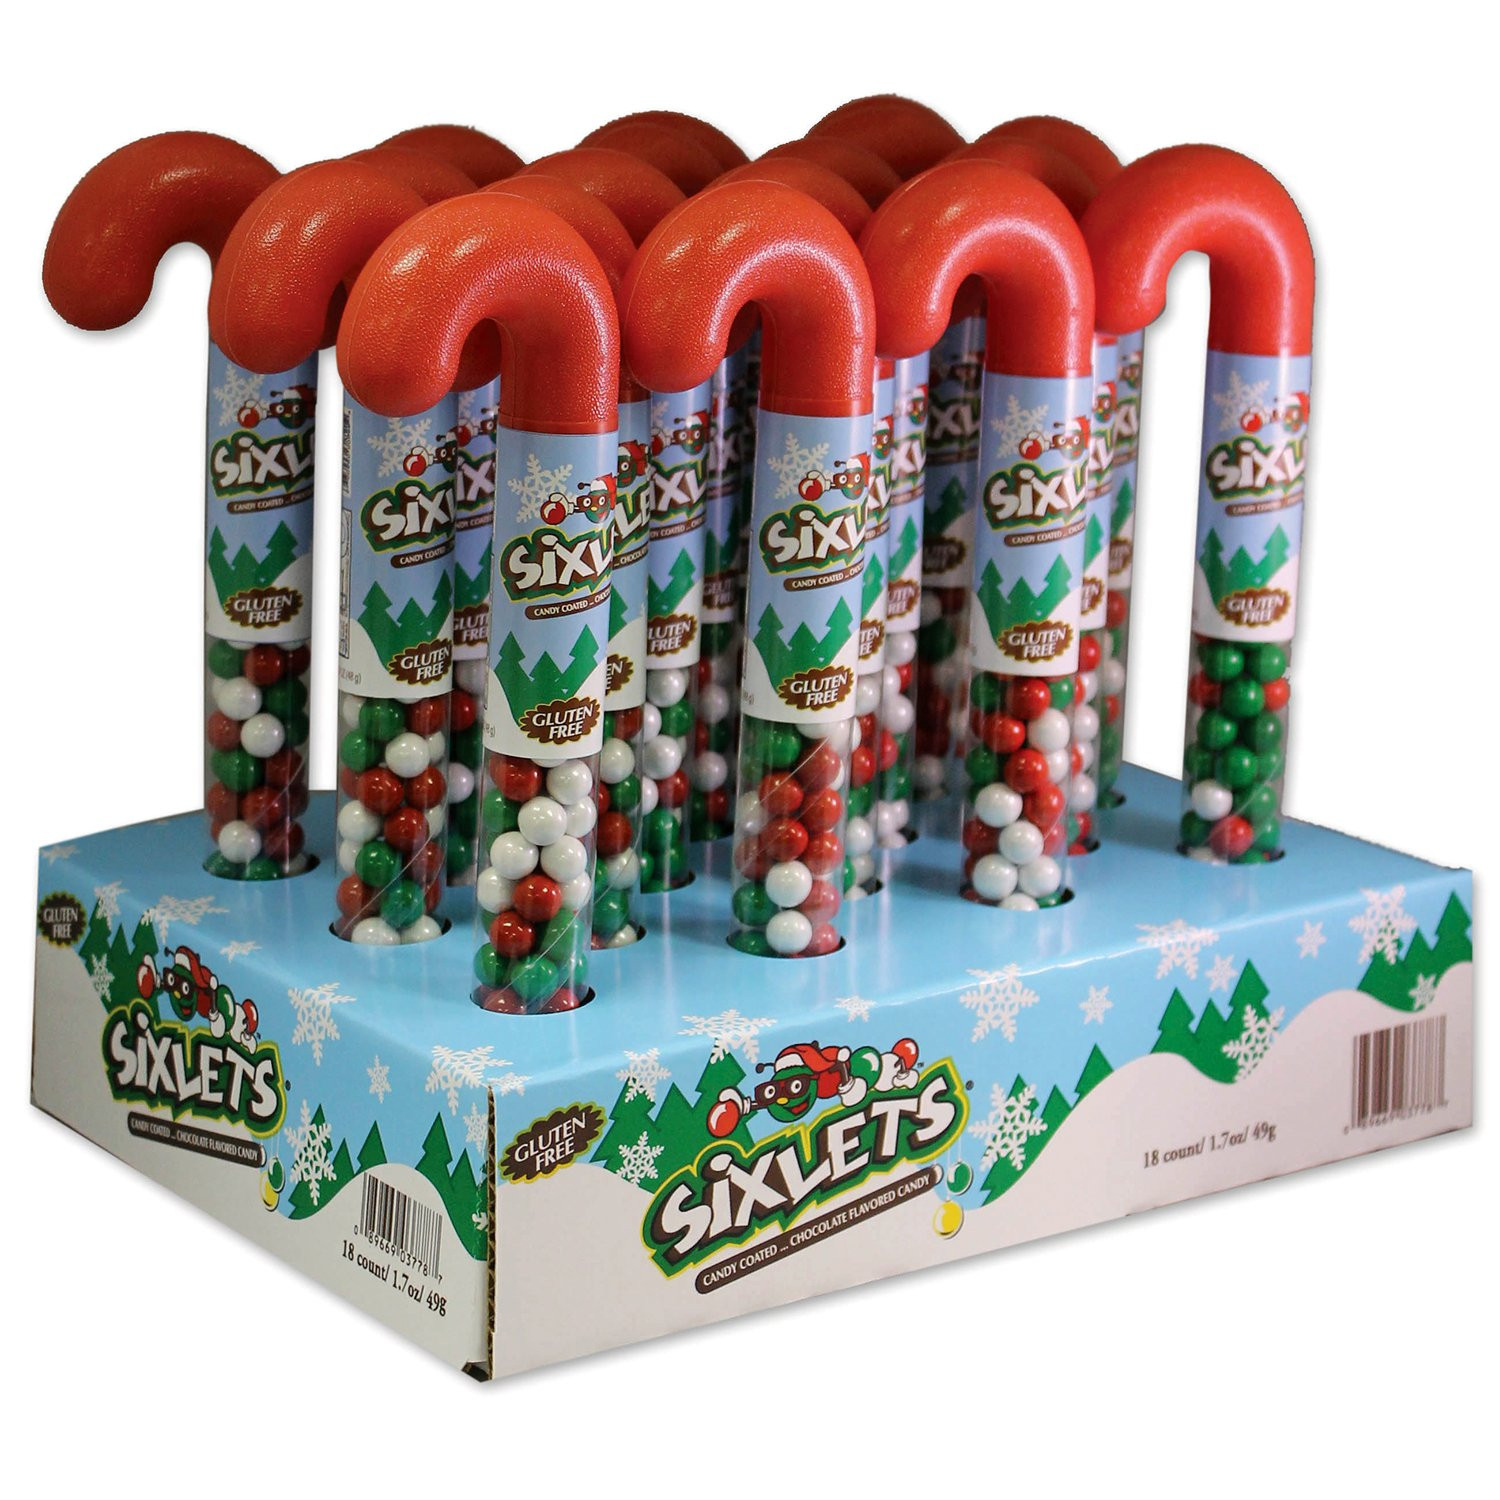 Candy Cane Christmas Shop
 Christmas Sixlets Candy Cane Candy Store